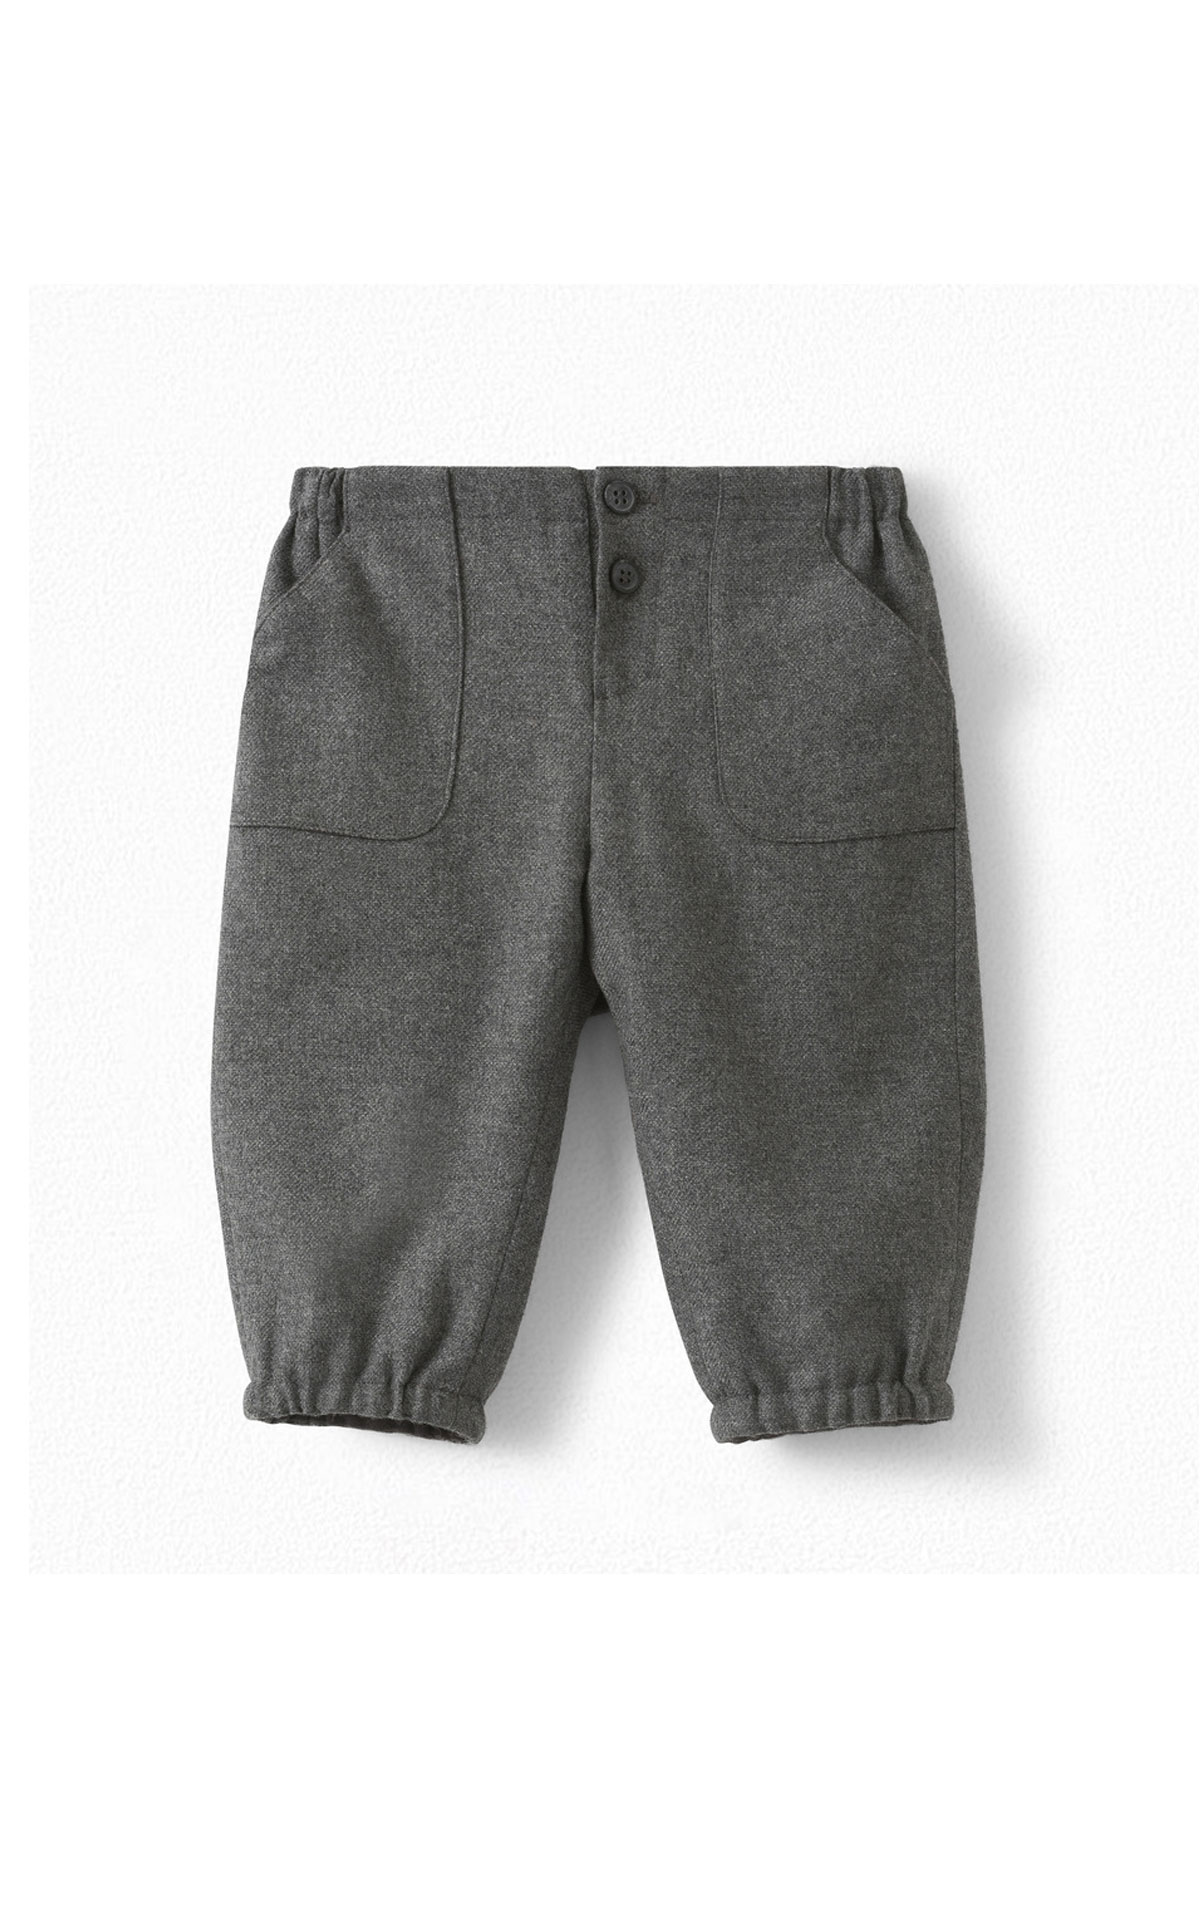 Bonpoint Play grey trousers from Bicester Village